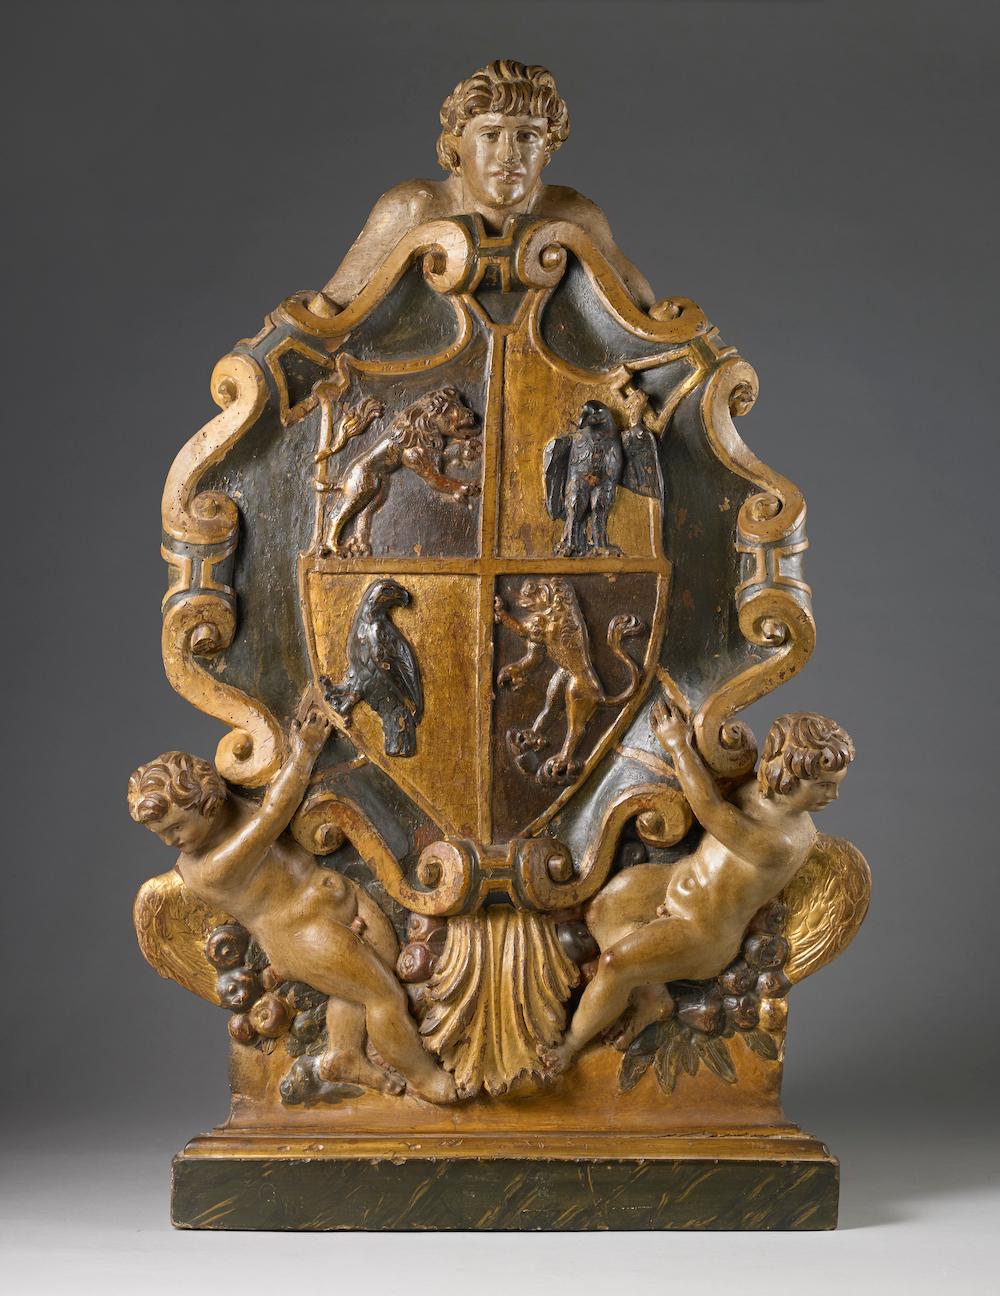 Artist active in northern Italy, 17th century 

Heraldic coat of arms: shield quartered at first and fourth in black with a rampant lion,
 to the second and third gold eagle


Carved, polychrome and gilded walnut wood, 88 x 55.5 x 4.5 cm


Heraldic